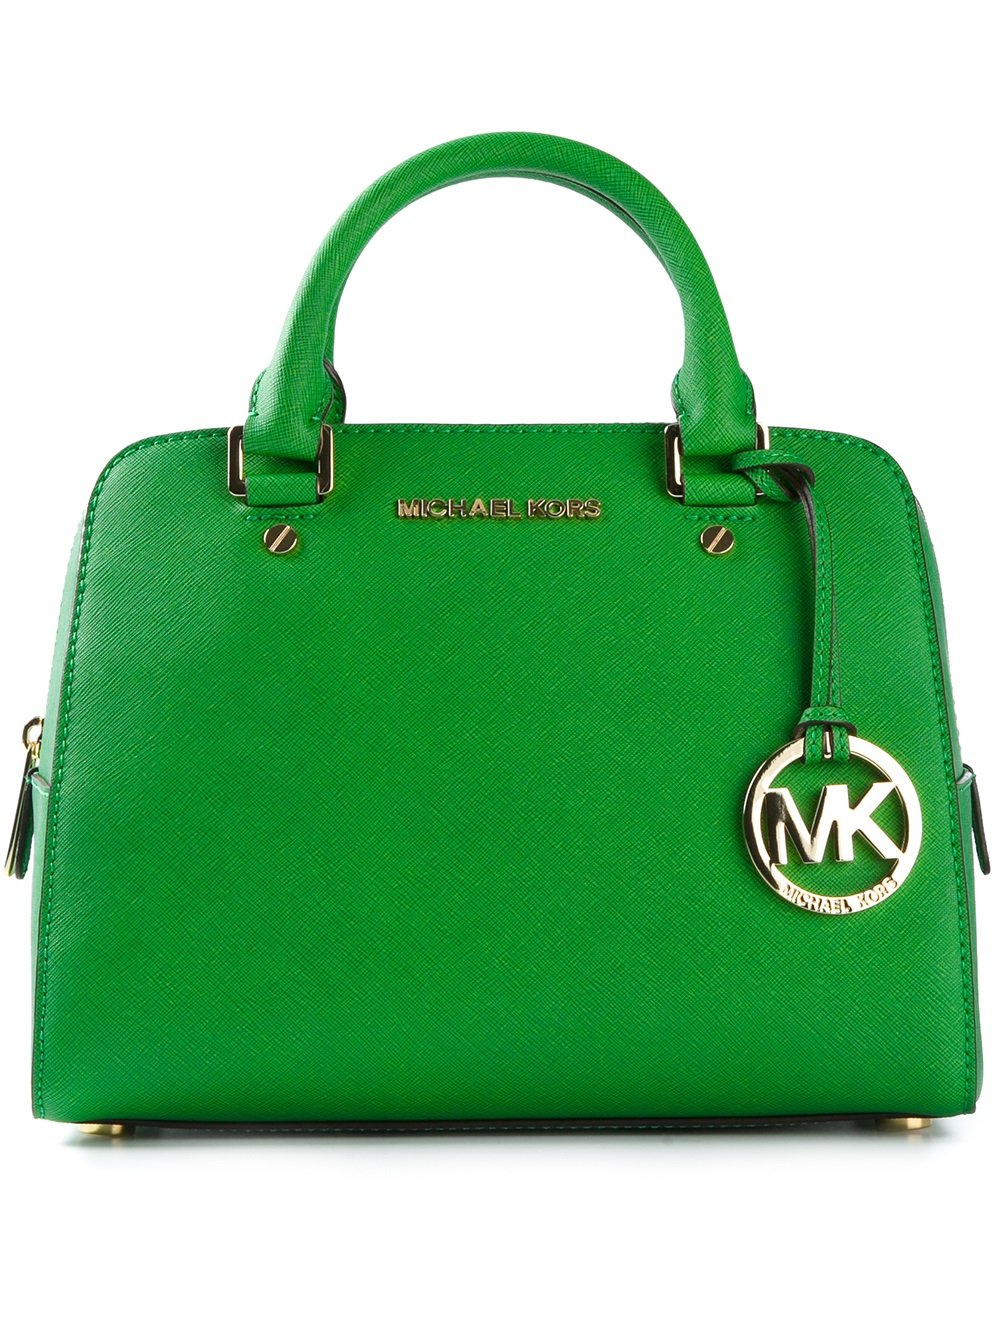 Michael Kors - Authenticated Handbag - Leather Green for Women, Never Worn, with Tag